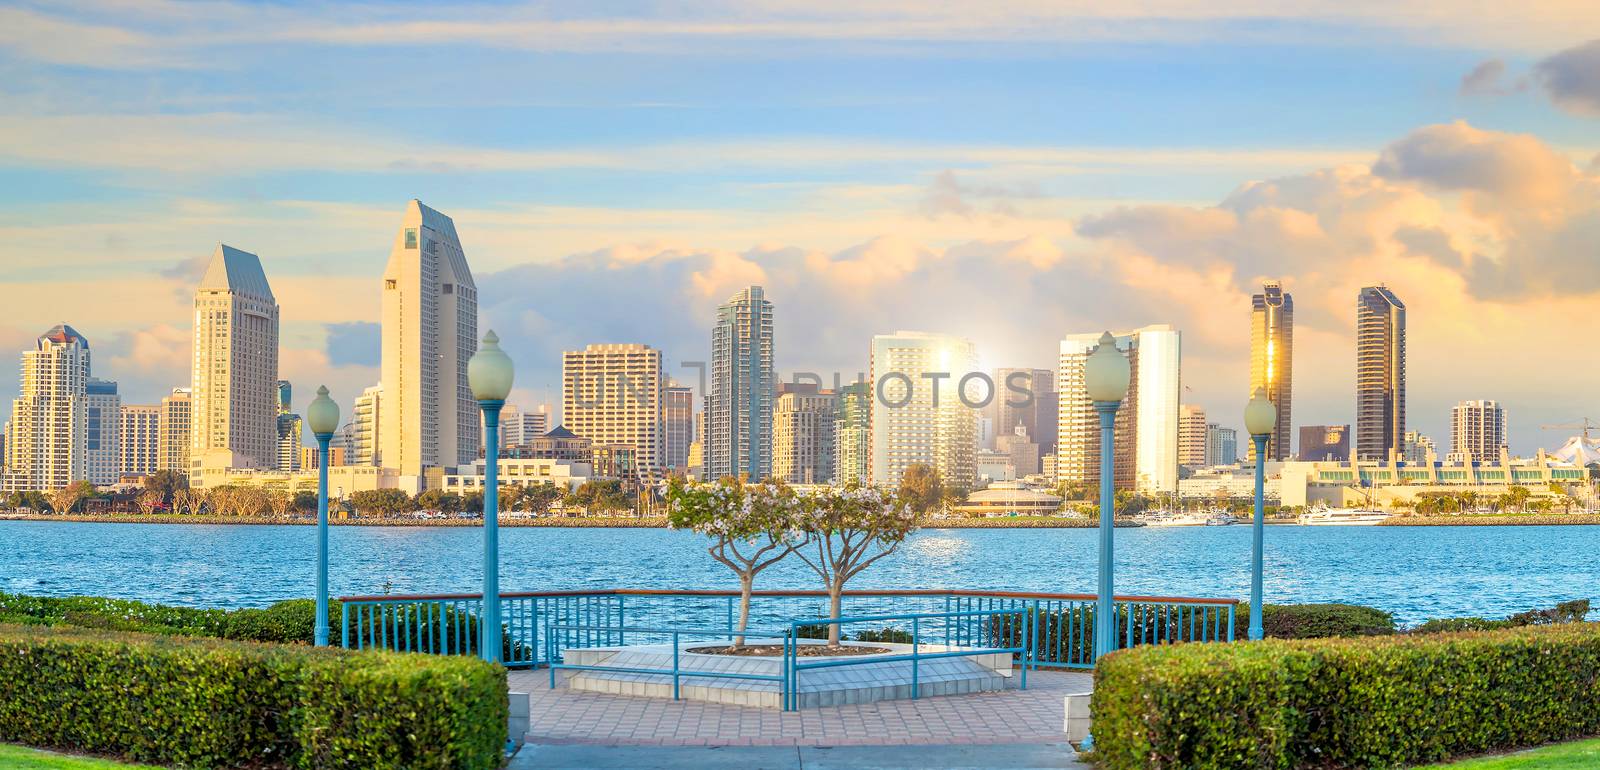 Panorama of Downtown of San Diego, California  by f11photo